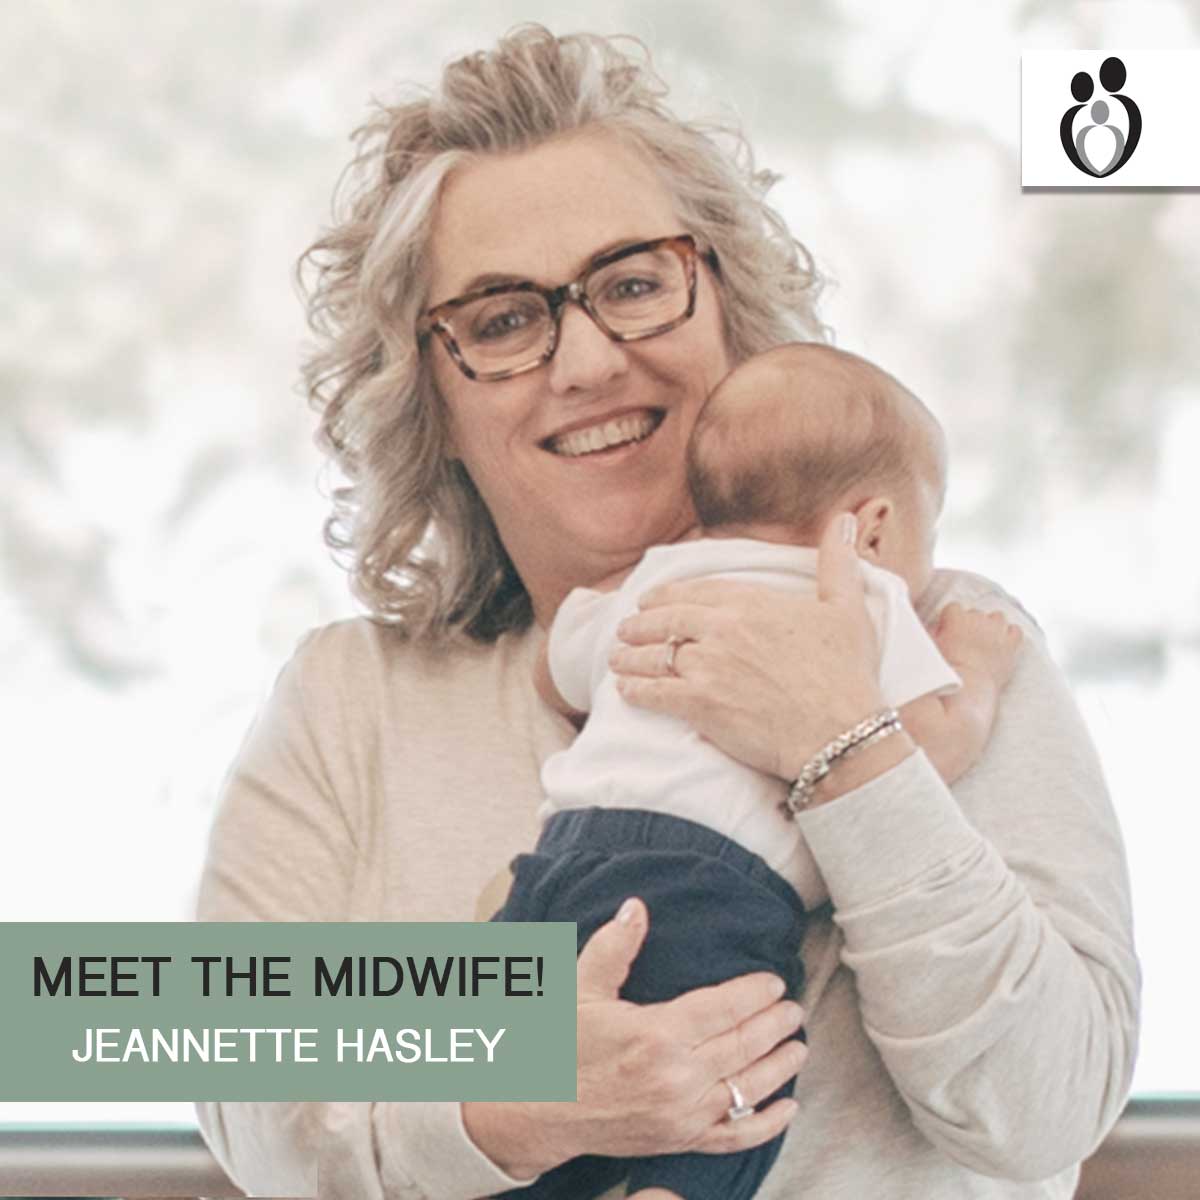 Jeannette Hasley, Midwife in Northwest Iowa | Promise Community Health Center in Sioux Center, Iowa | Home births in northwest Iowa, Home births in southeast South Dakota, Home births in southwest Minnesota | Home births in Sioux Falls South Dakota, Home births in Beresford South Dakota, Home births in Sioux City IA, Home births in LeMars IA, Home births in Worthington MN, Home births in Iowa, Home births in South Dakota, Home births in Minnesota